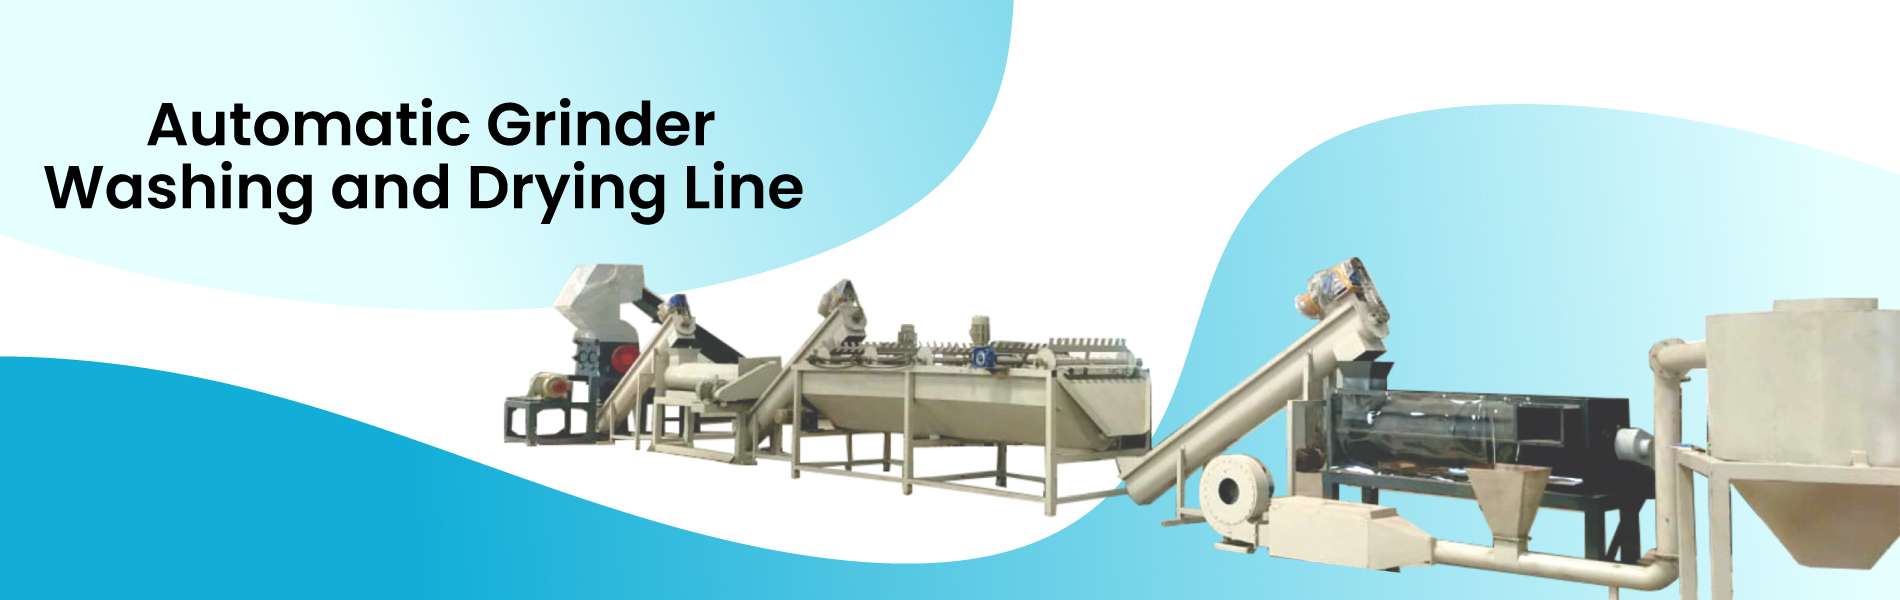 Automatic Grinder Washing and Drying Line in Delhi